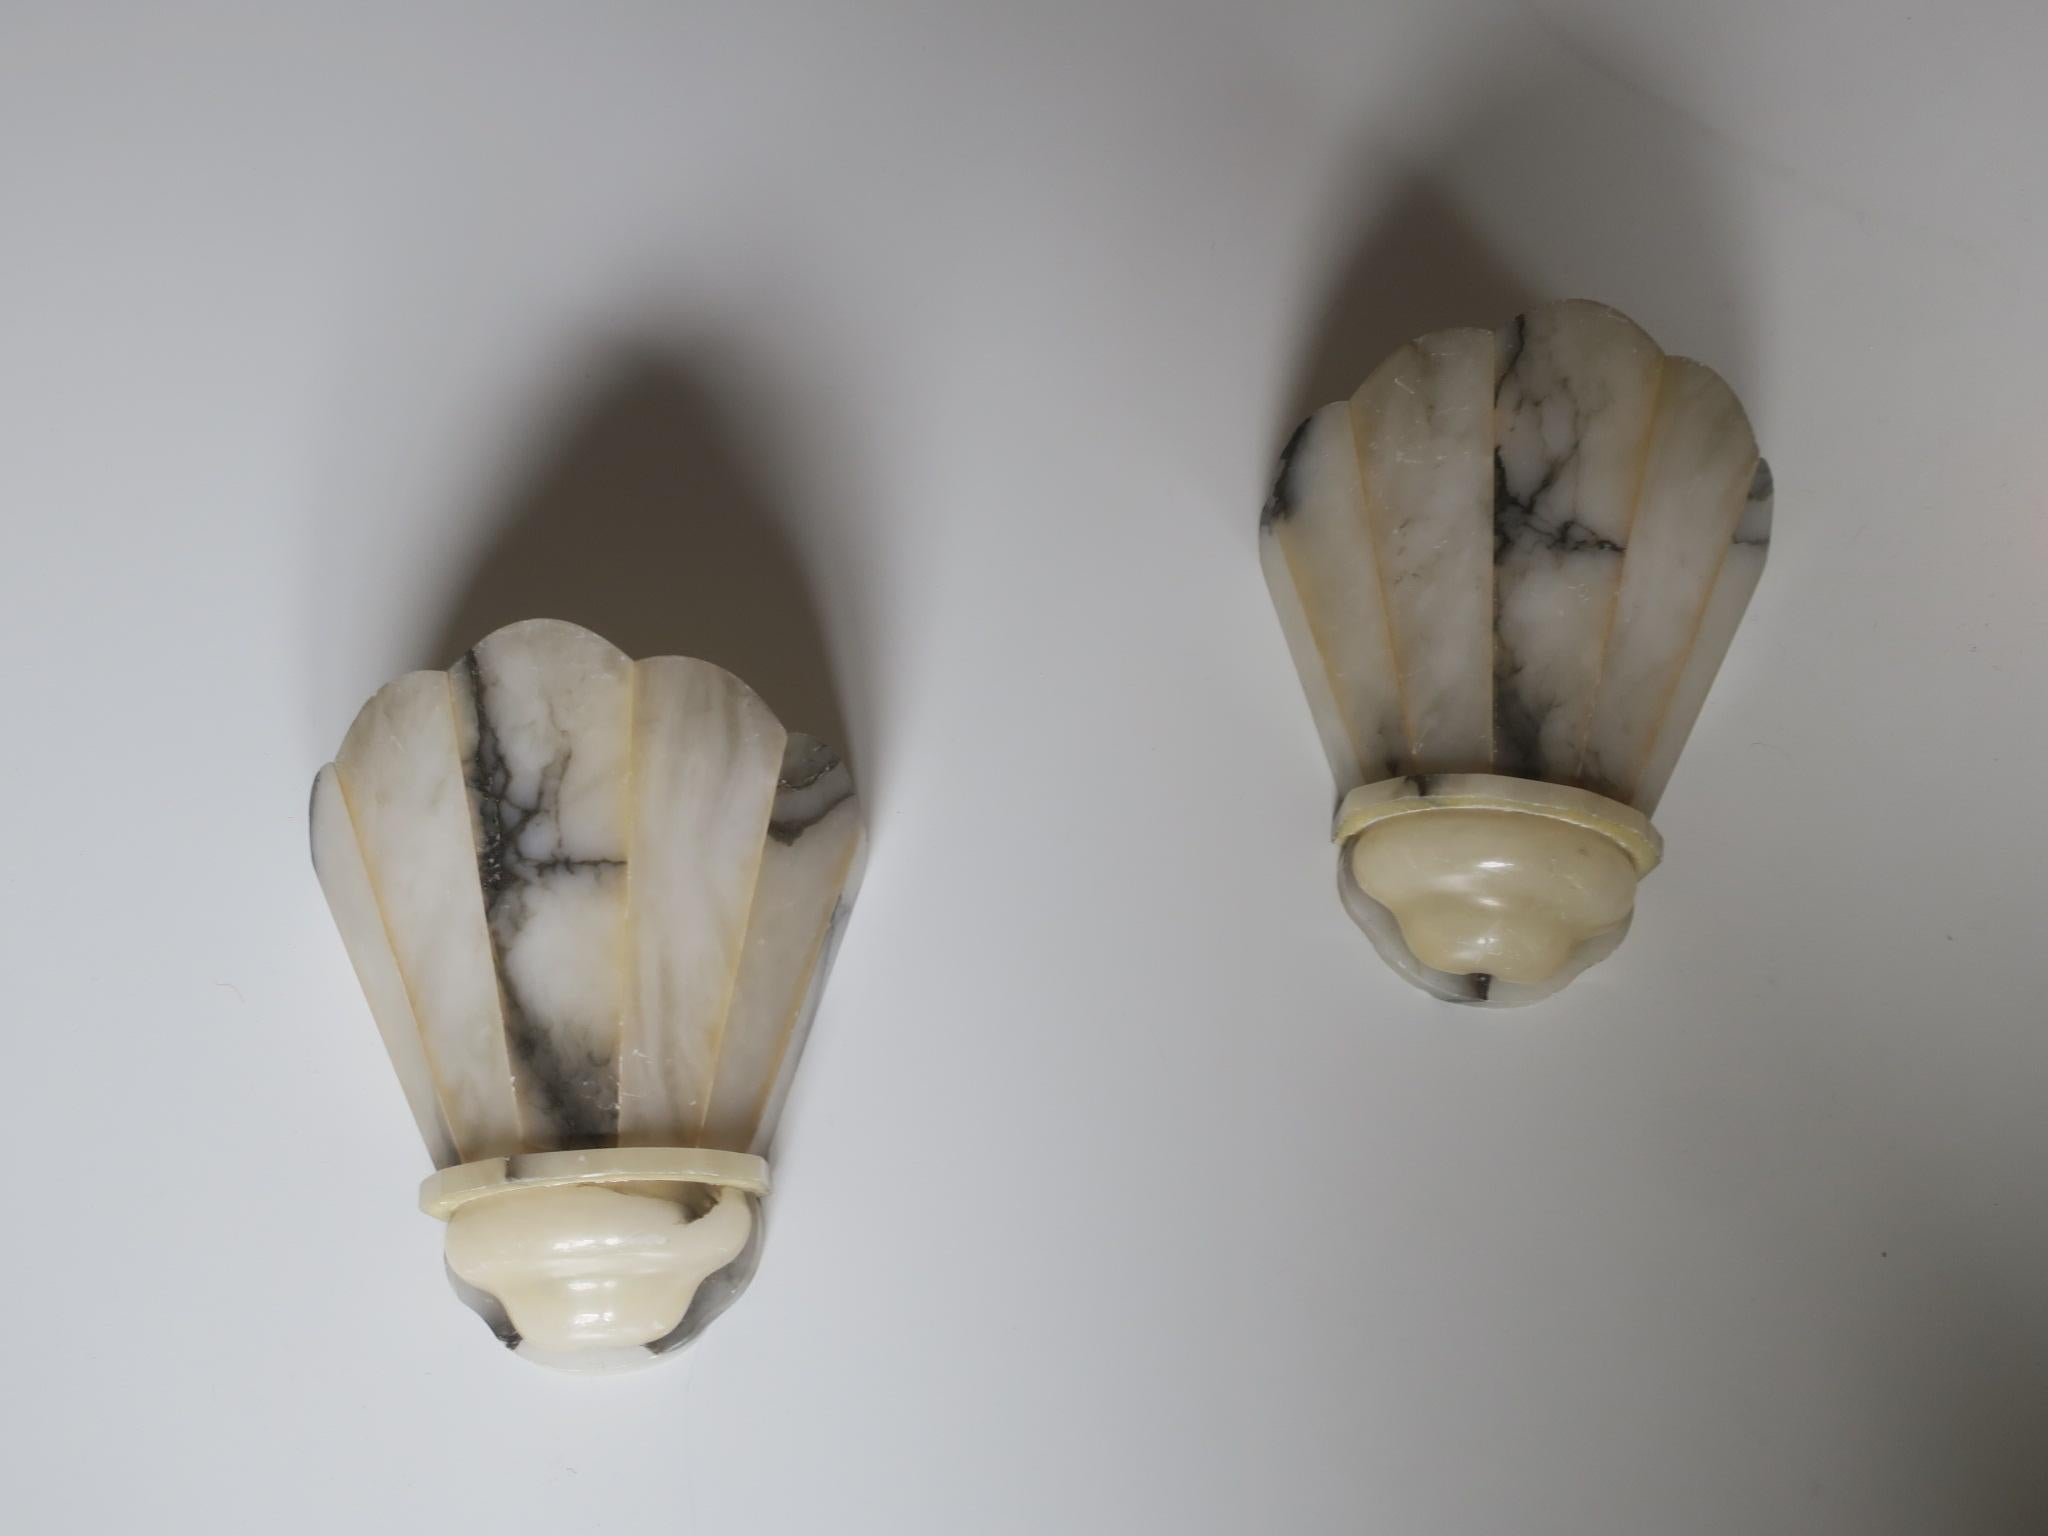 Pair of alabaster art deco sconces dating from the 1920s, clear form and beautifully veined.